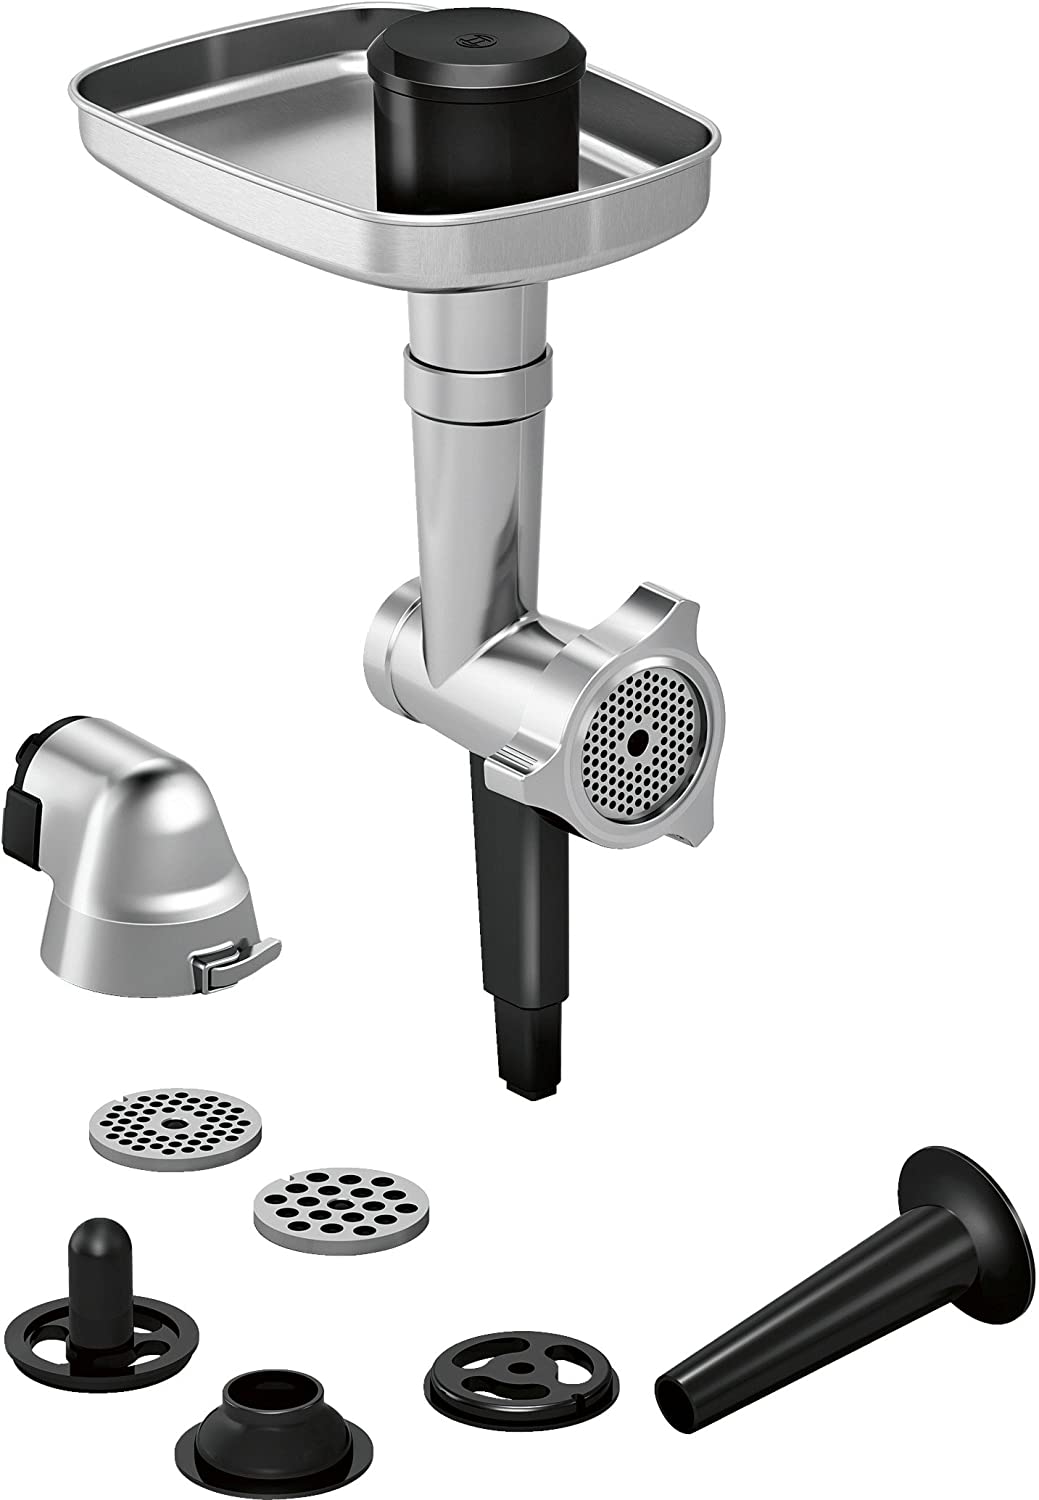 Bosch Hausgerate Bosch Hunting Adventure MUZ9HA1 Accessory Set, Meat Grinder, Sausage Tamper, Gebbing Attachment, Perforated Discs 3.5 and 8 mm, Aluminium Mincer, for OptiMUM Food Processors